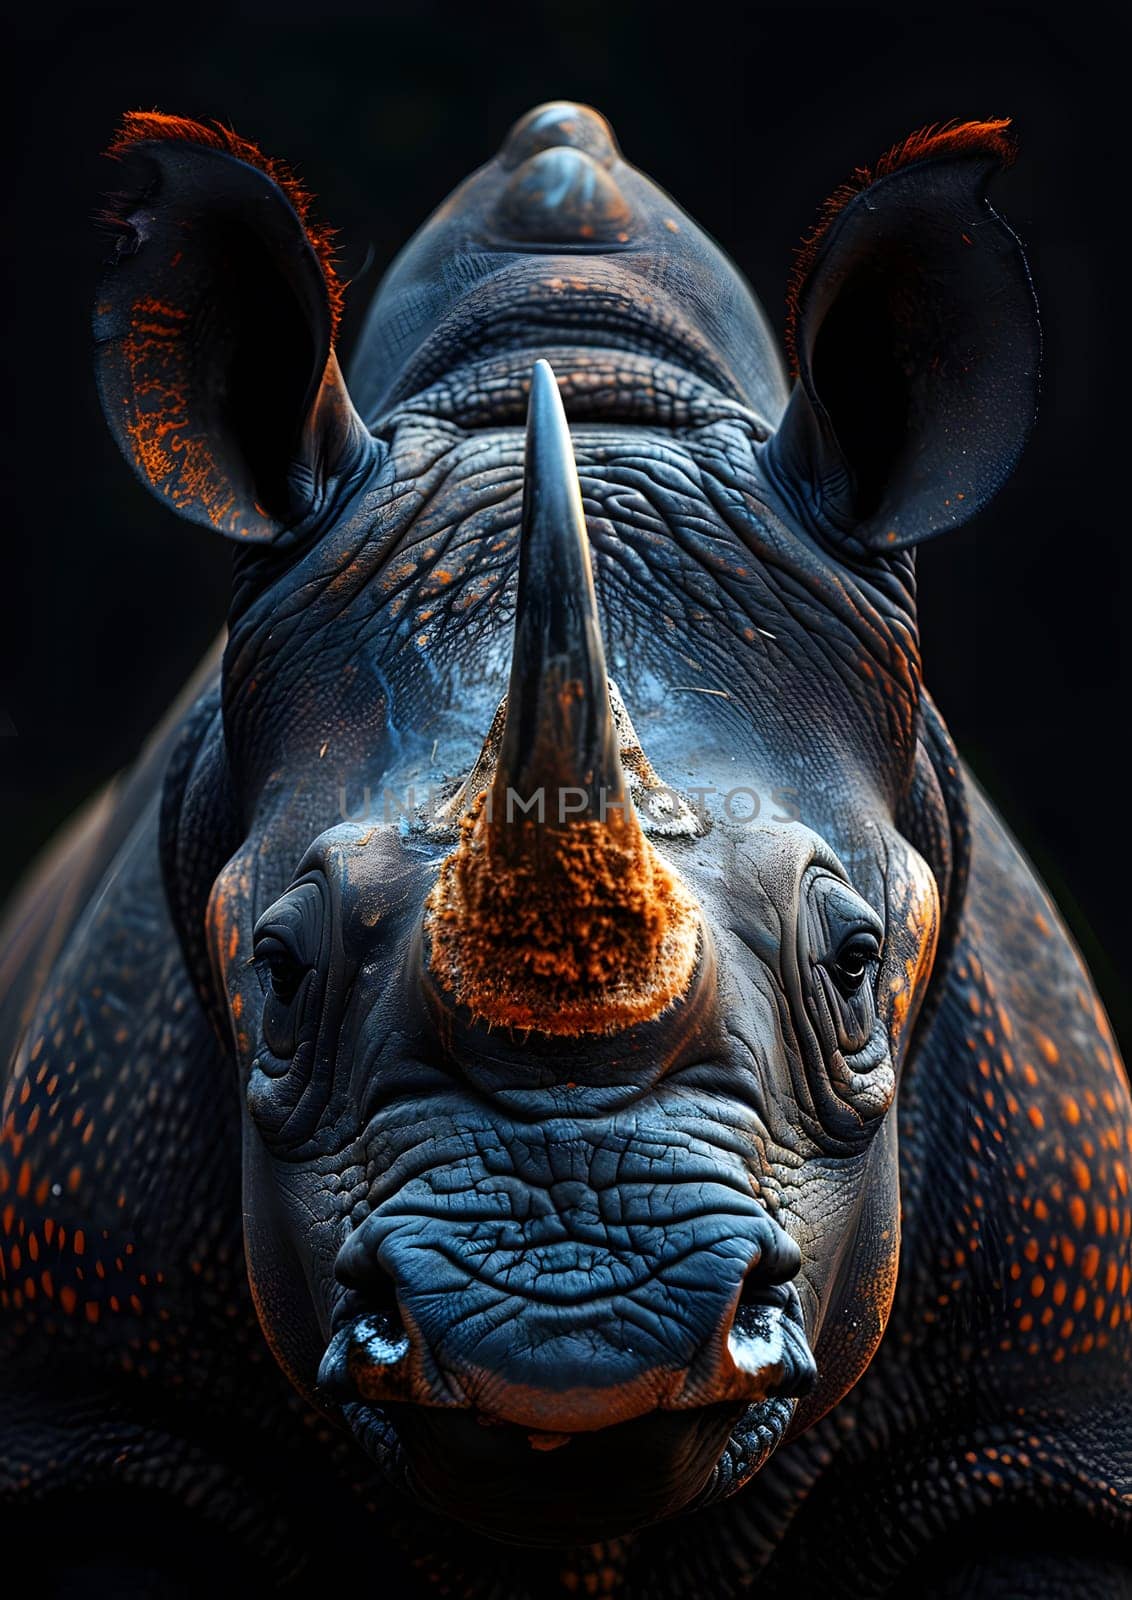 A closeup of a rhino with a long horn, resembling the symmetry of a rayfinned fish. The horn shines in electric blue, resembling metal art in the darkness of wildlife